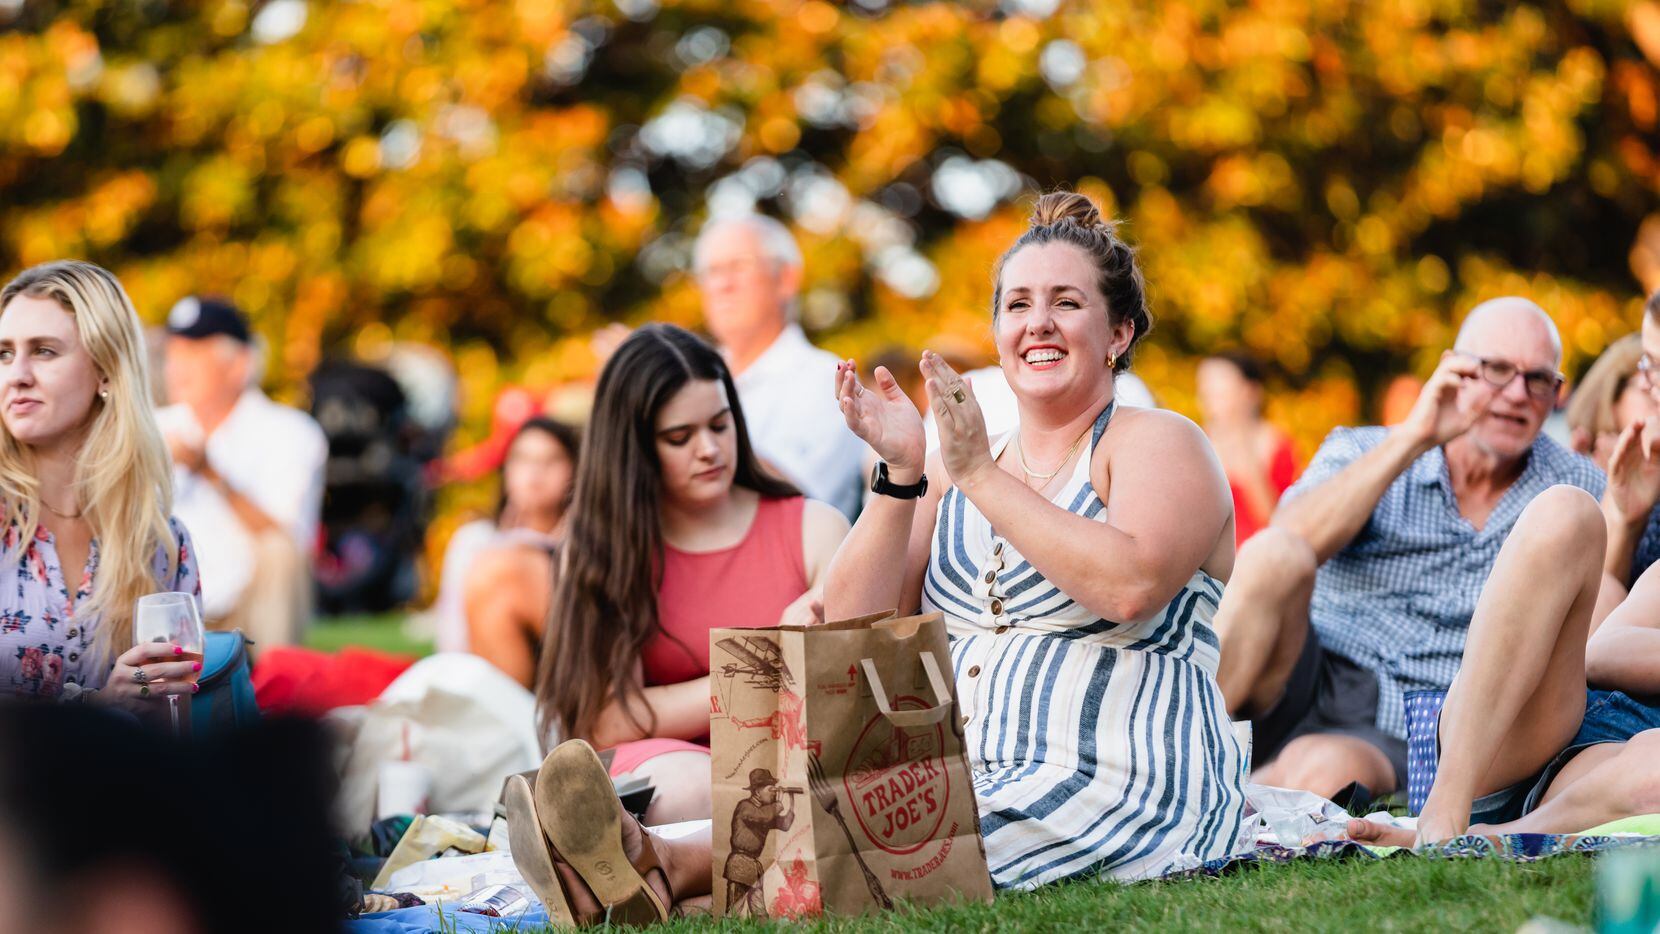 Audiences gathered for picnics and music at the first annual “Under the Stars with The...